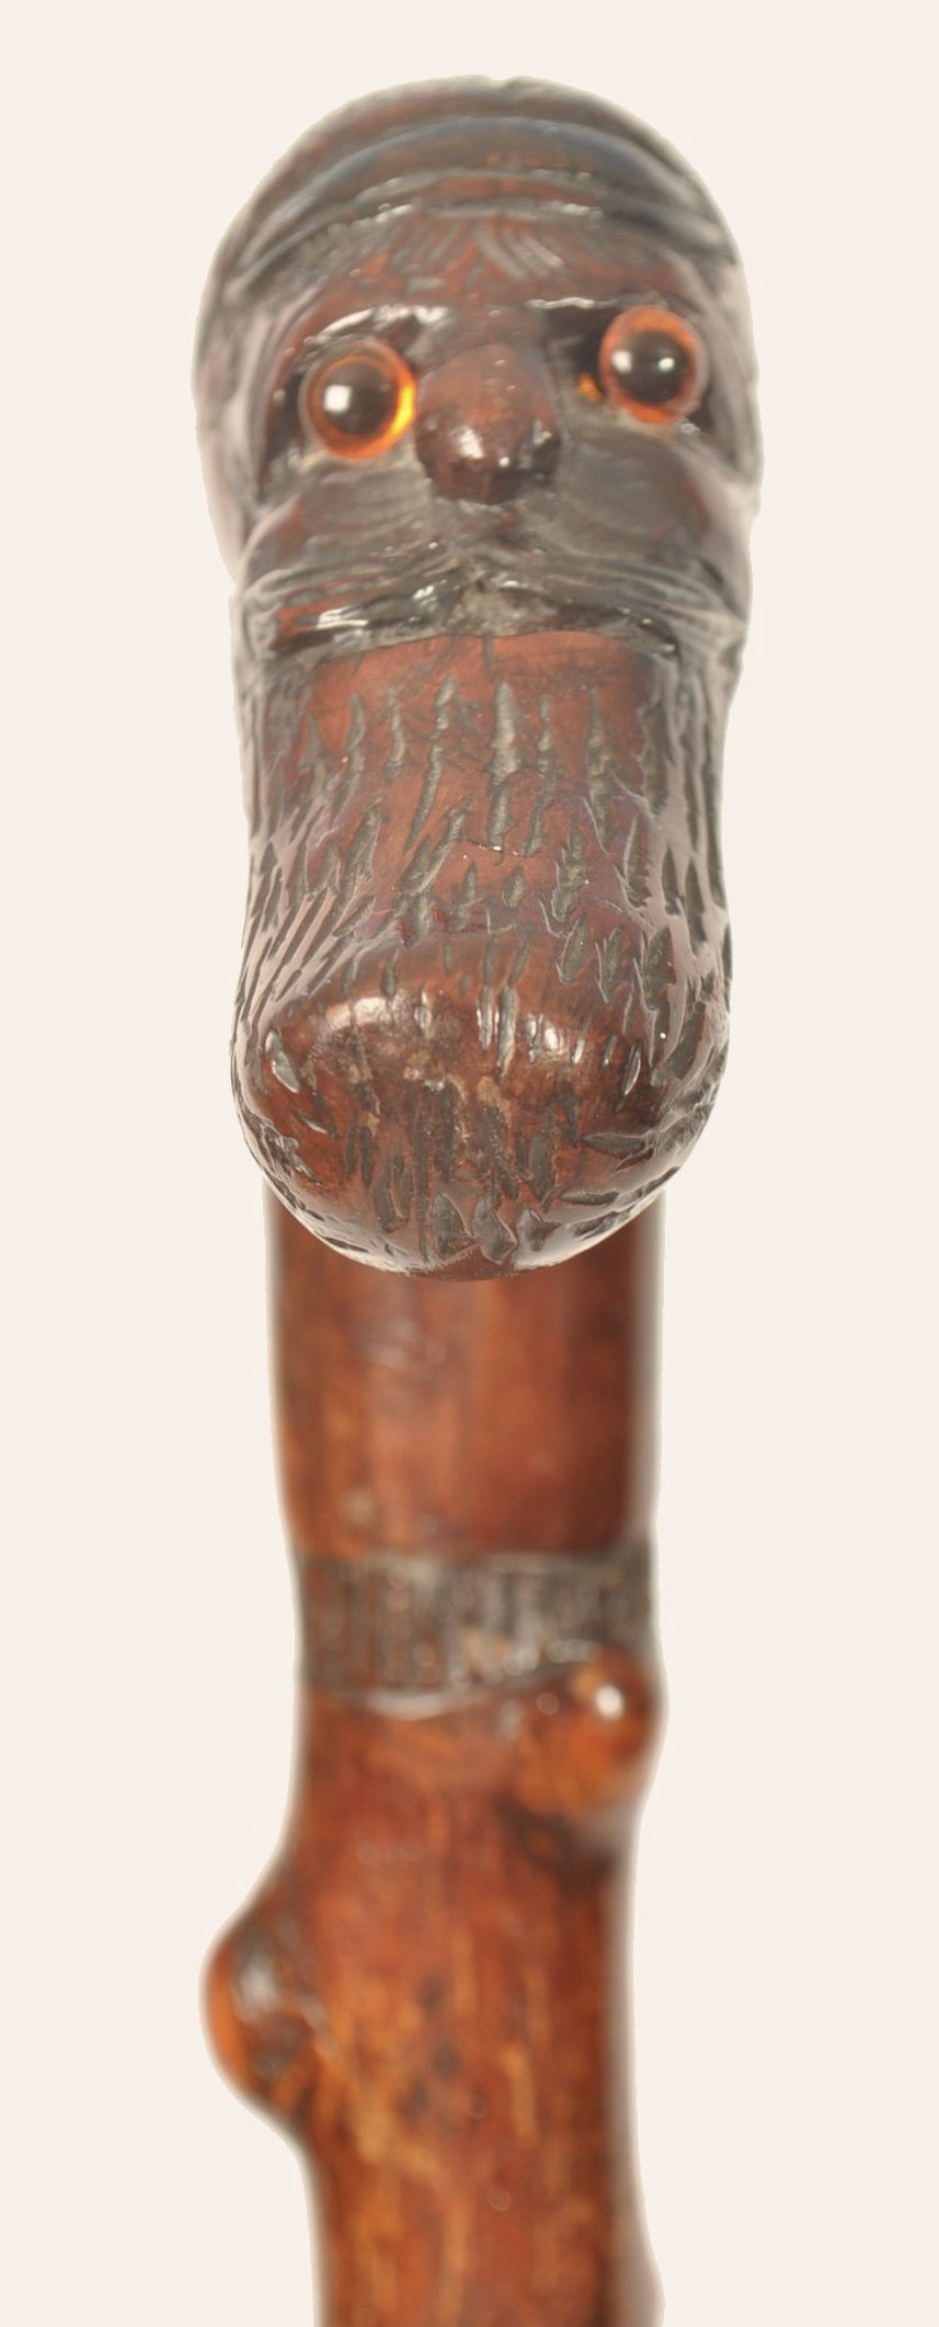 Cricketing interest walking stick with the head of WG grace - Image 2 of 5